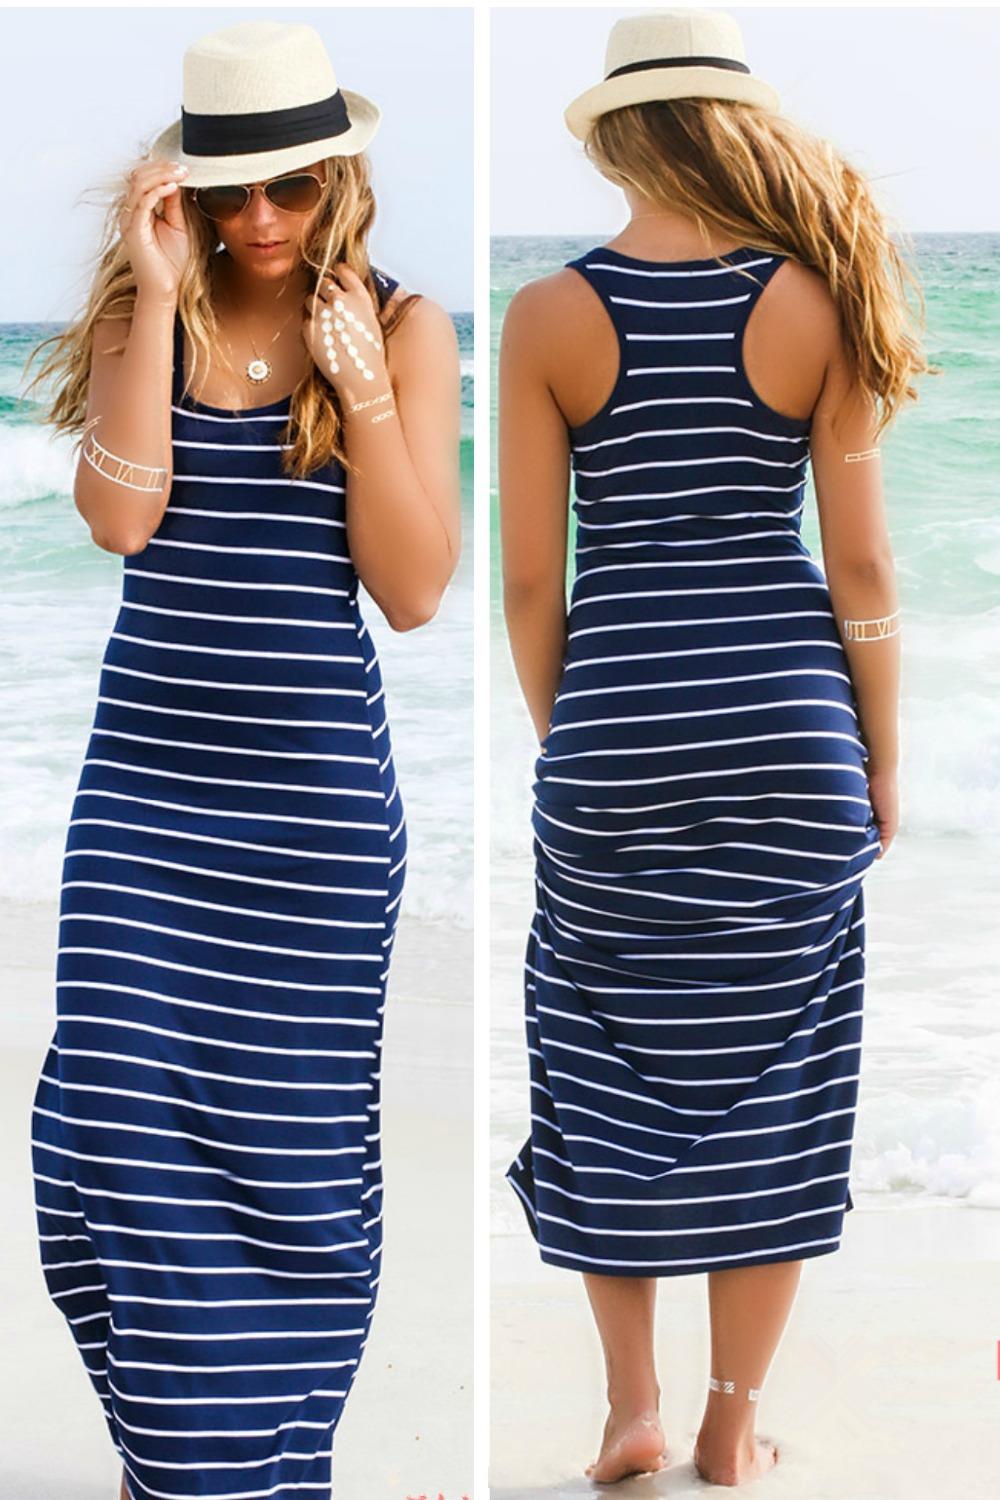 New Sexy Fashion Sleeveless Striped Casual Party B...